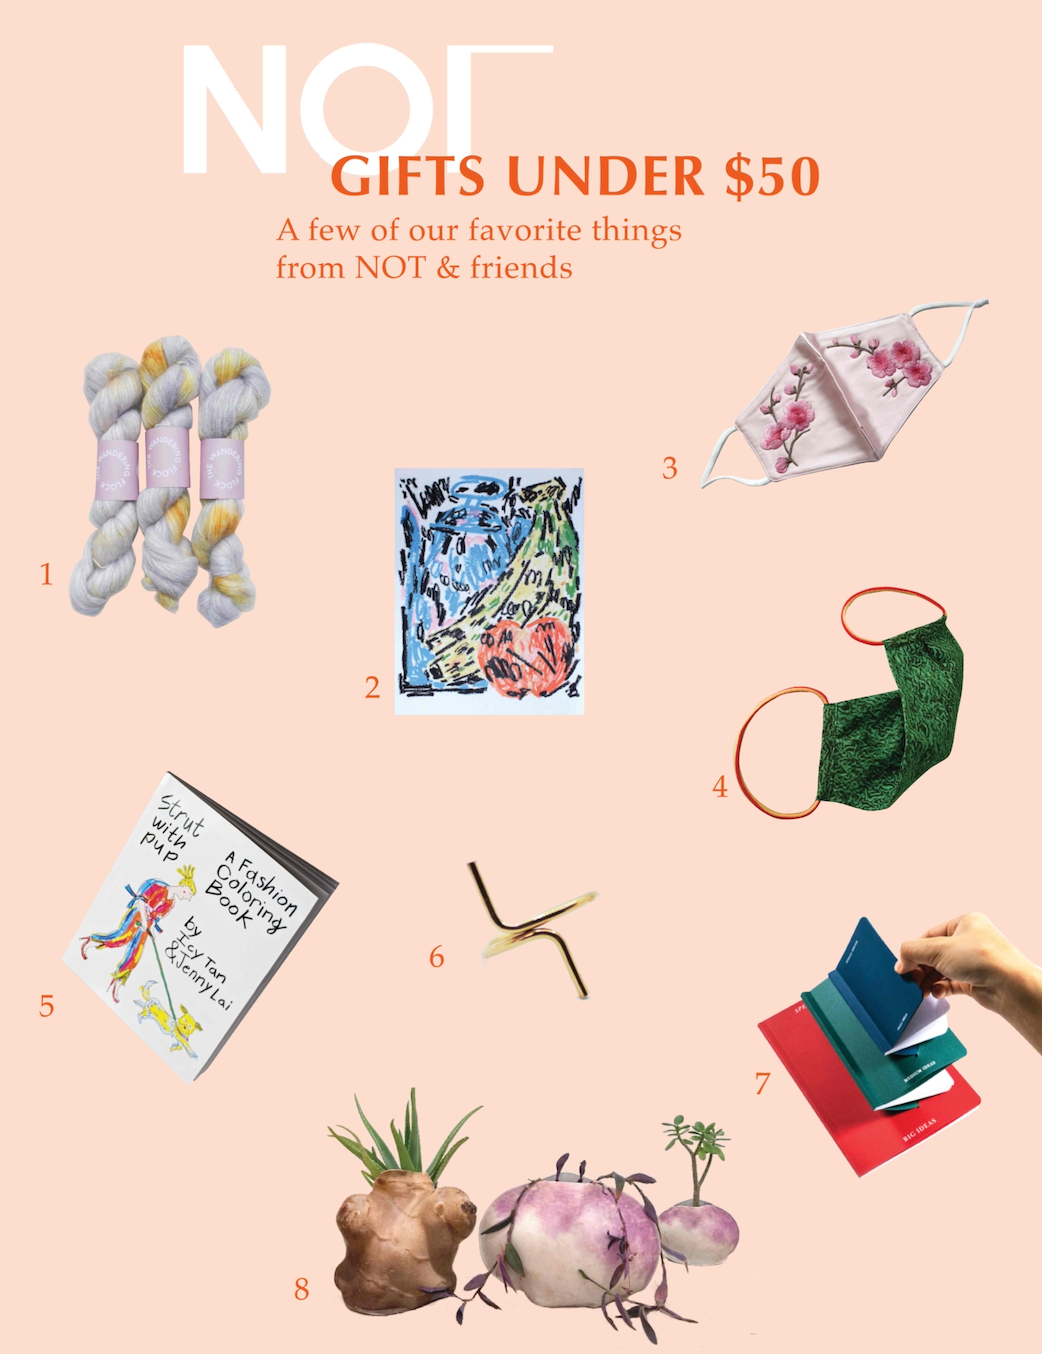 99 Art Supplies Gift Guide for Young Artist - Forget Him Knot